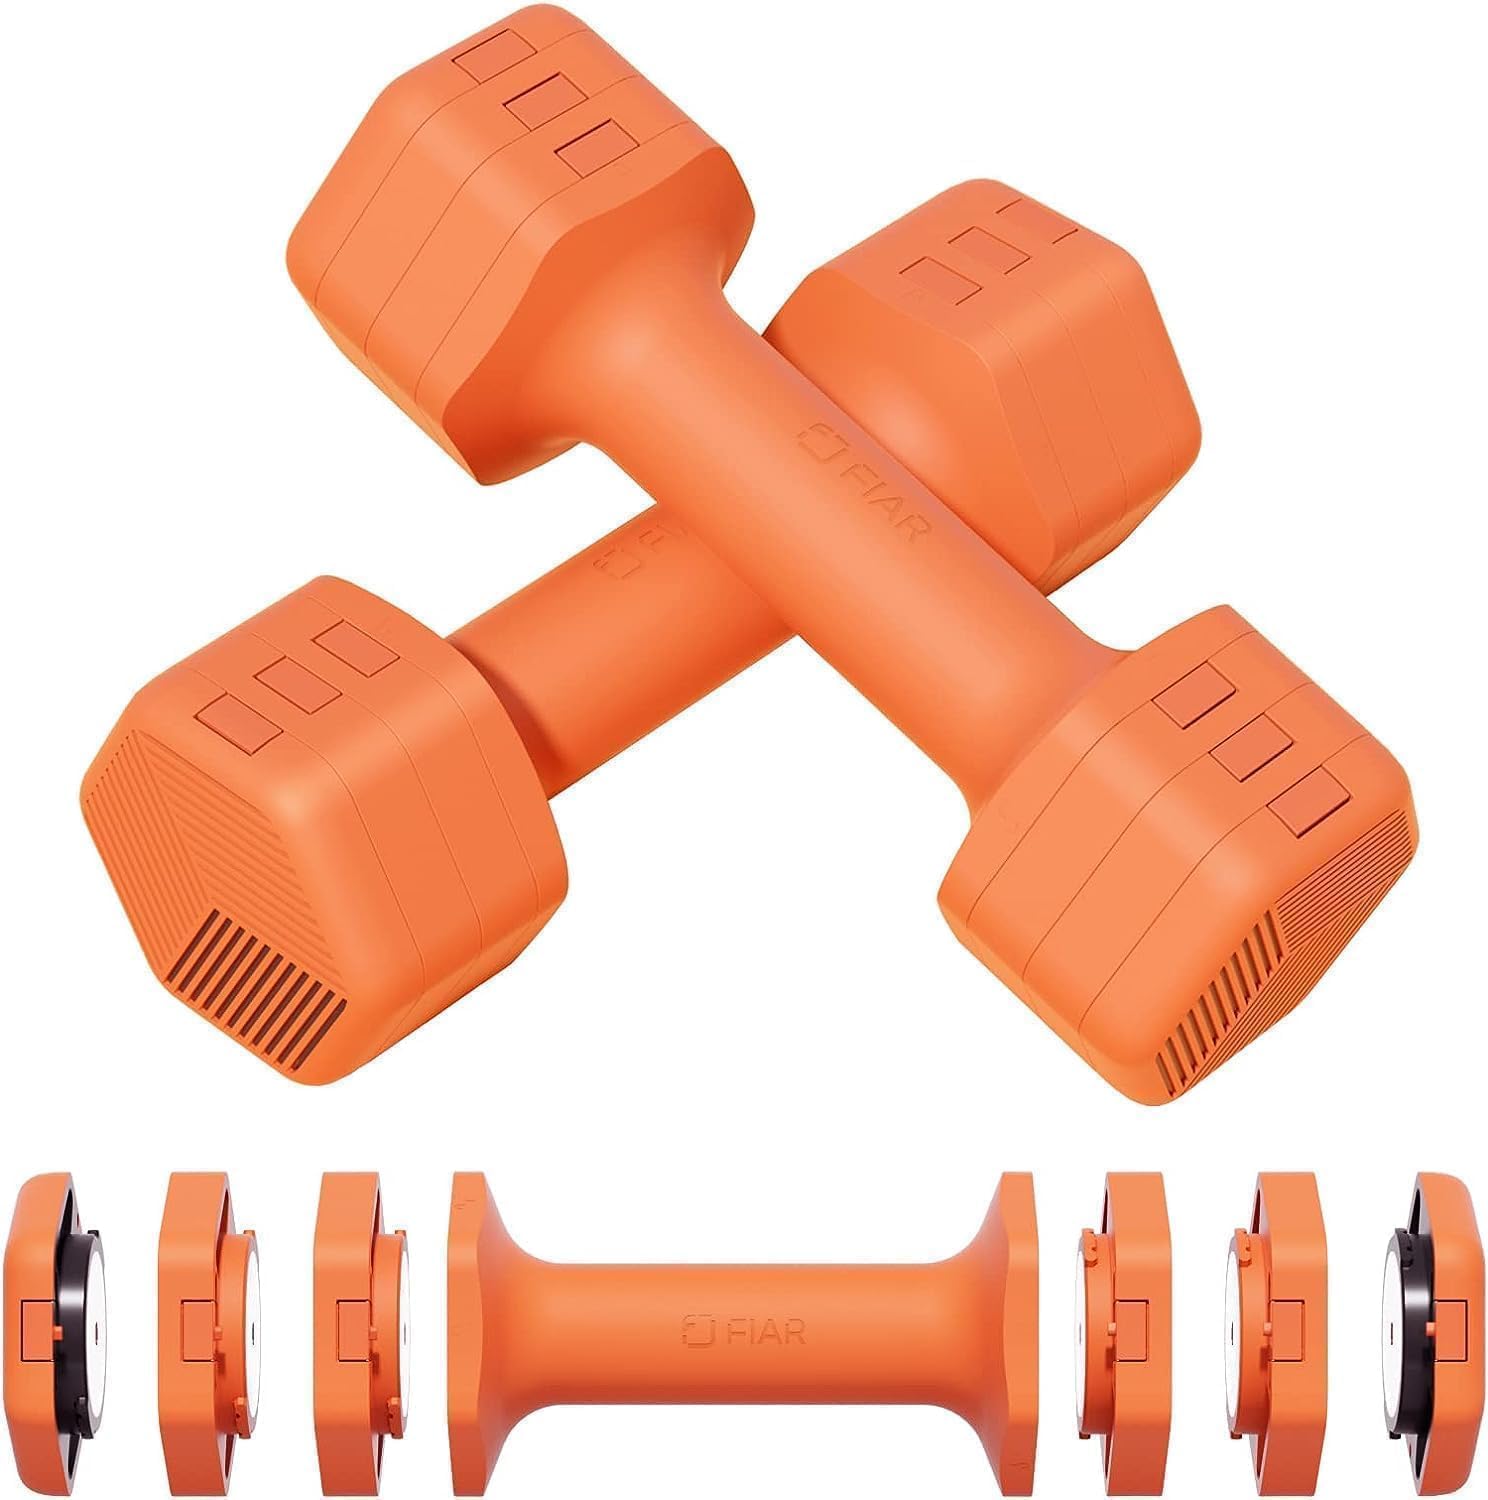 Dumbbell Set with Adjustable Weights - Pair of 4lb, 6lb, 8lb, and 10lb (2-5lb each) Free Weights Ideal for Home Gym Workouts and Strength Training for Both Women and Men